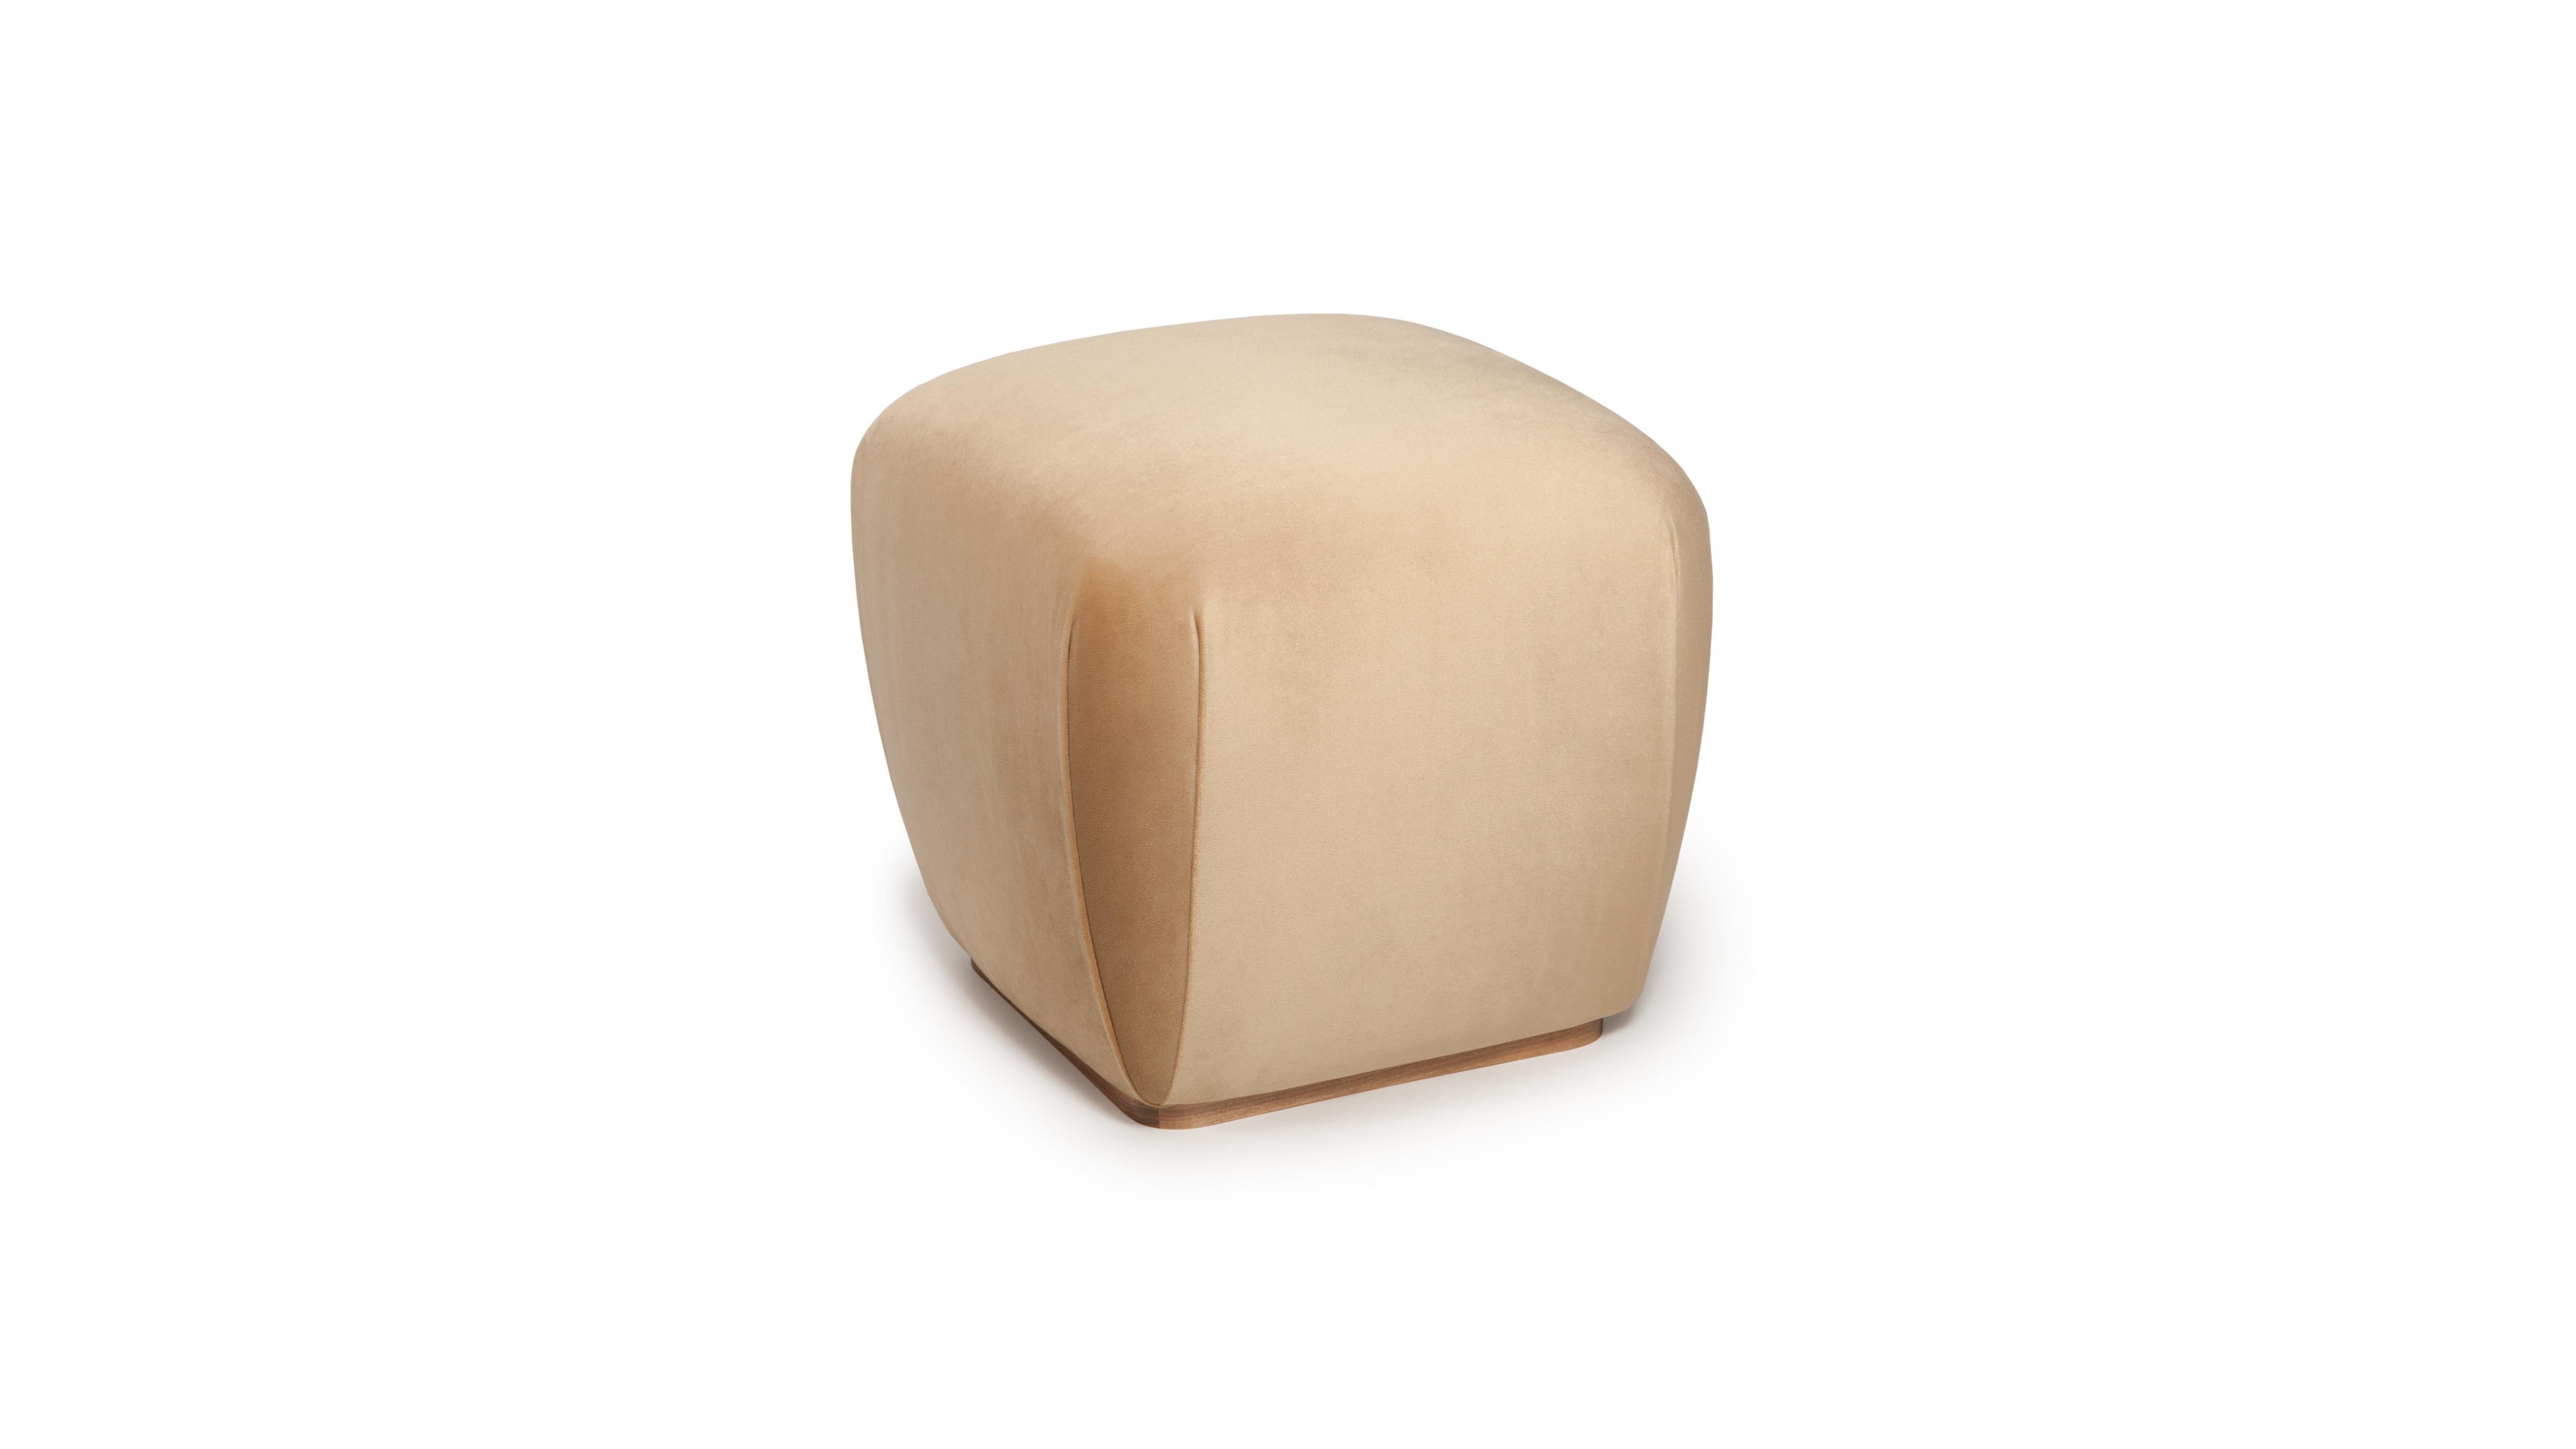 Na Pali Stool by InsidherLand
Dimensions: D 45 x W 45 x H 43 cm.
Materials: Wooden base, walnut veneer, InsidherLand Bright Velvet Ref. Sand fabric.
10 kg.
Available in different fabrics.

The details of the Na Pali stool were originaly designed on